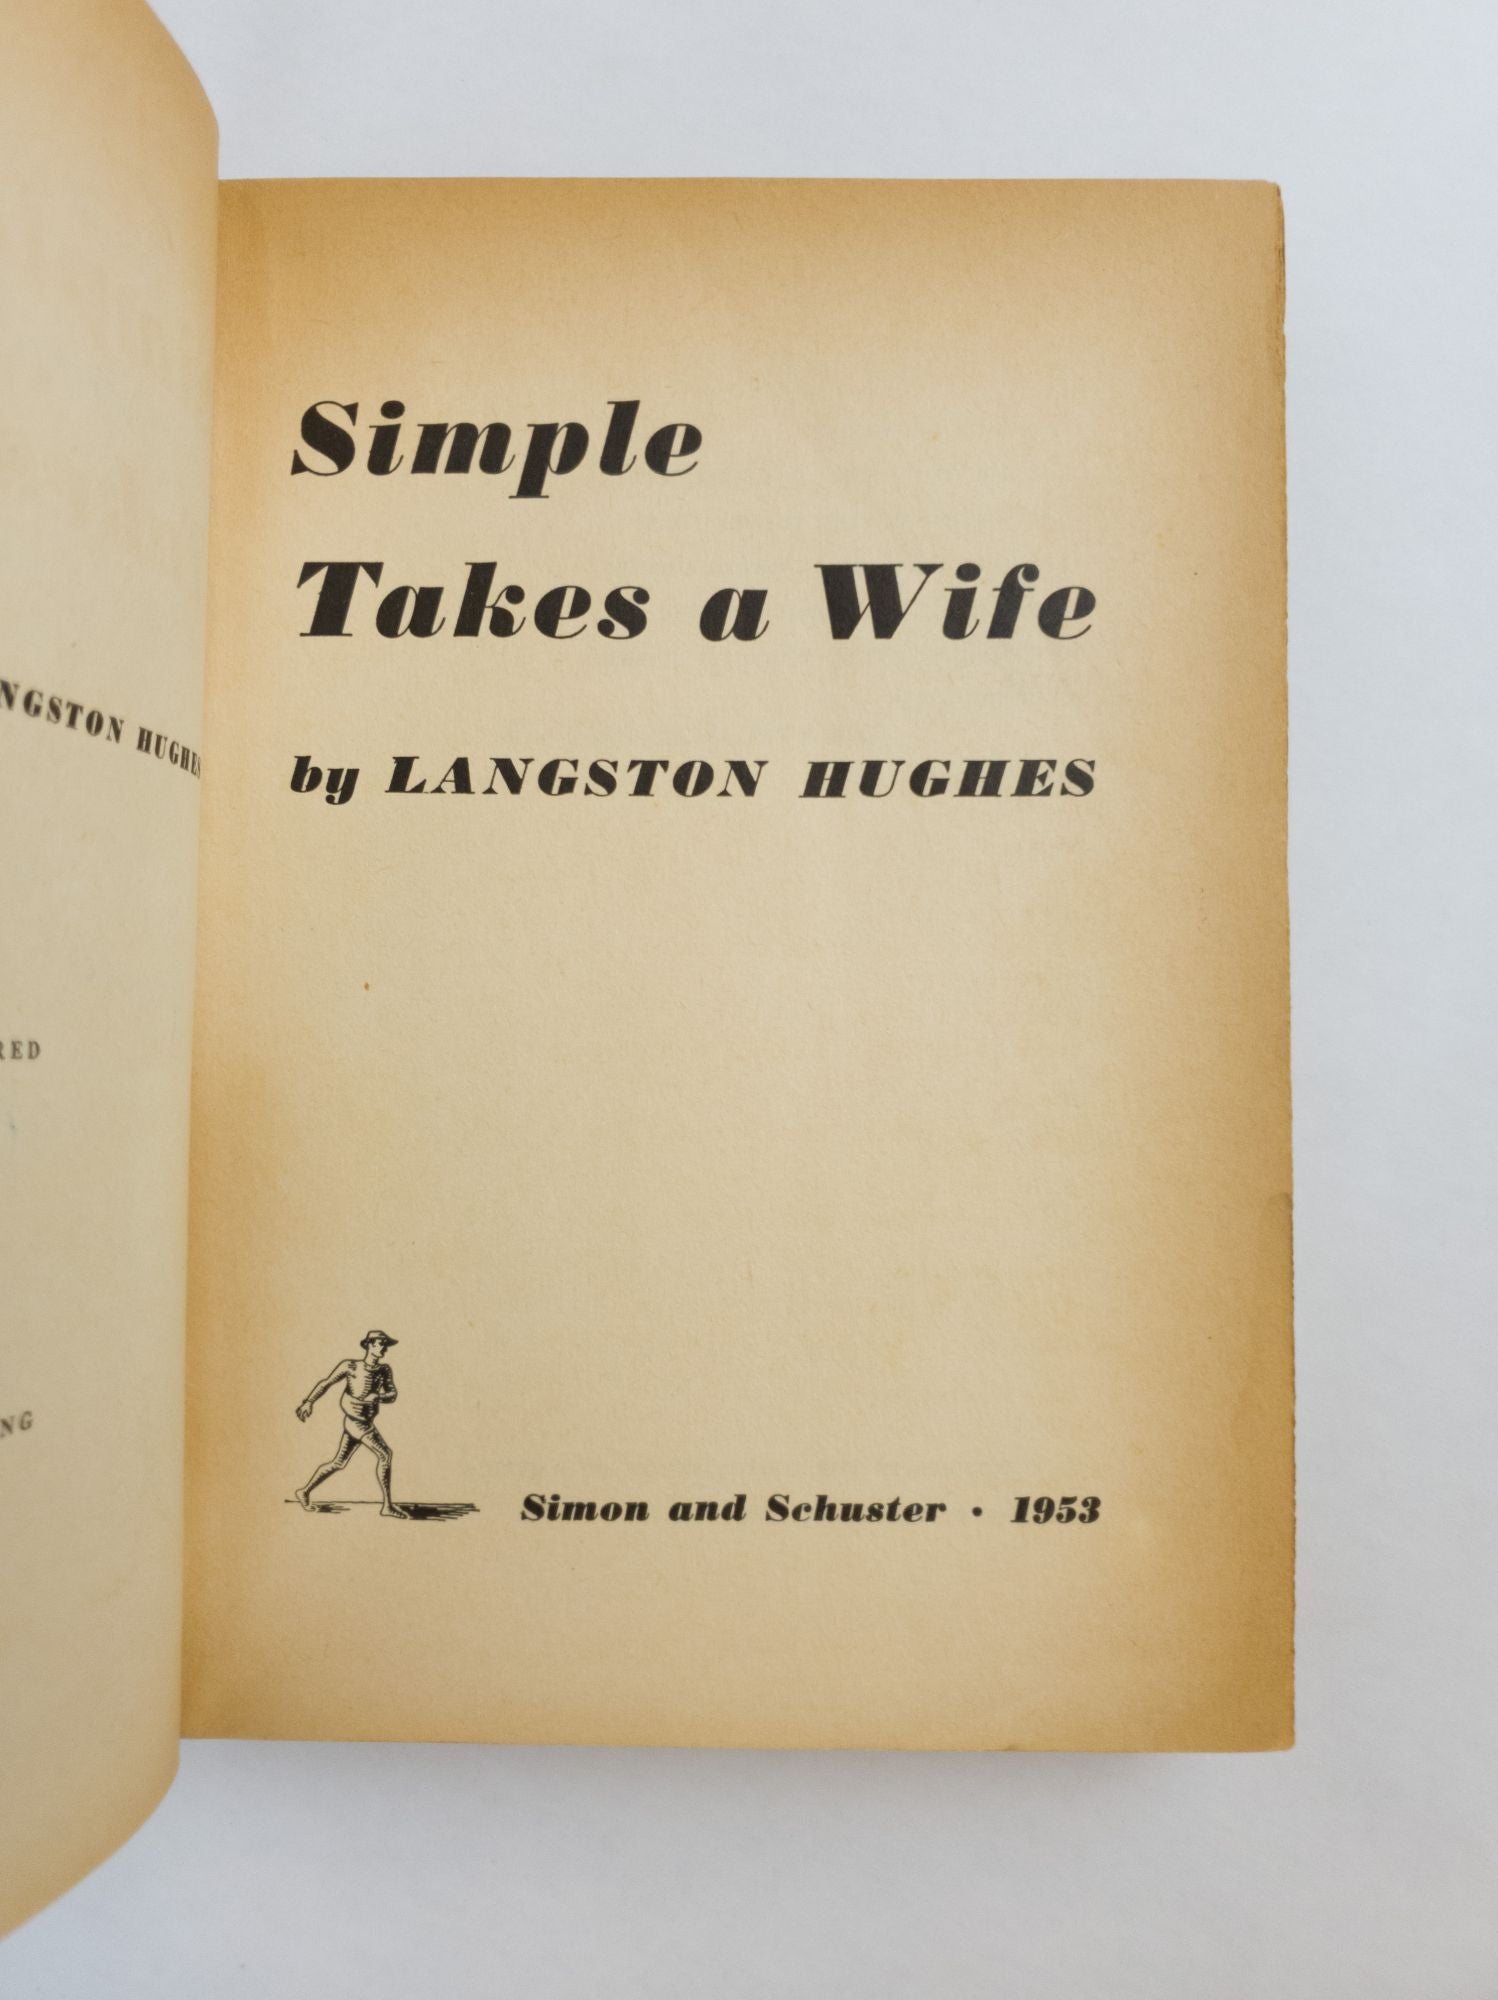 Product Image for SIMPLE TAKES A WIFE [Signed]